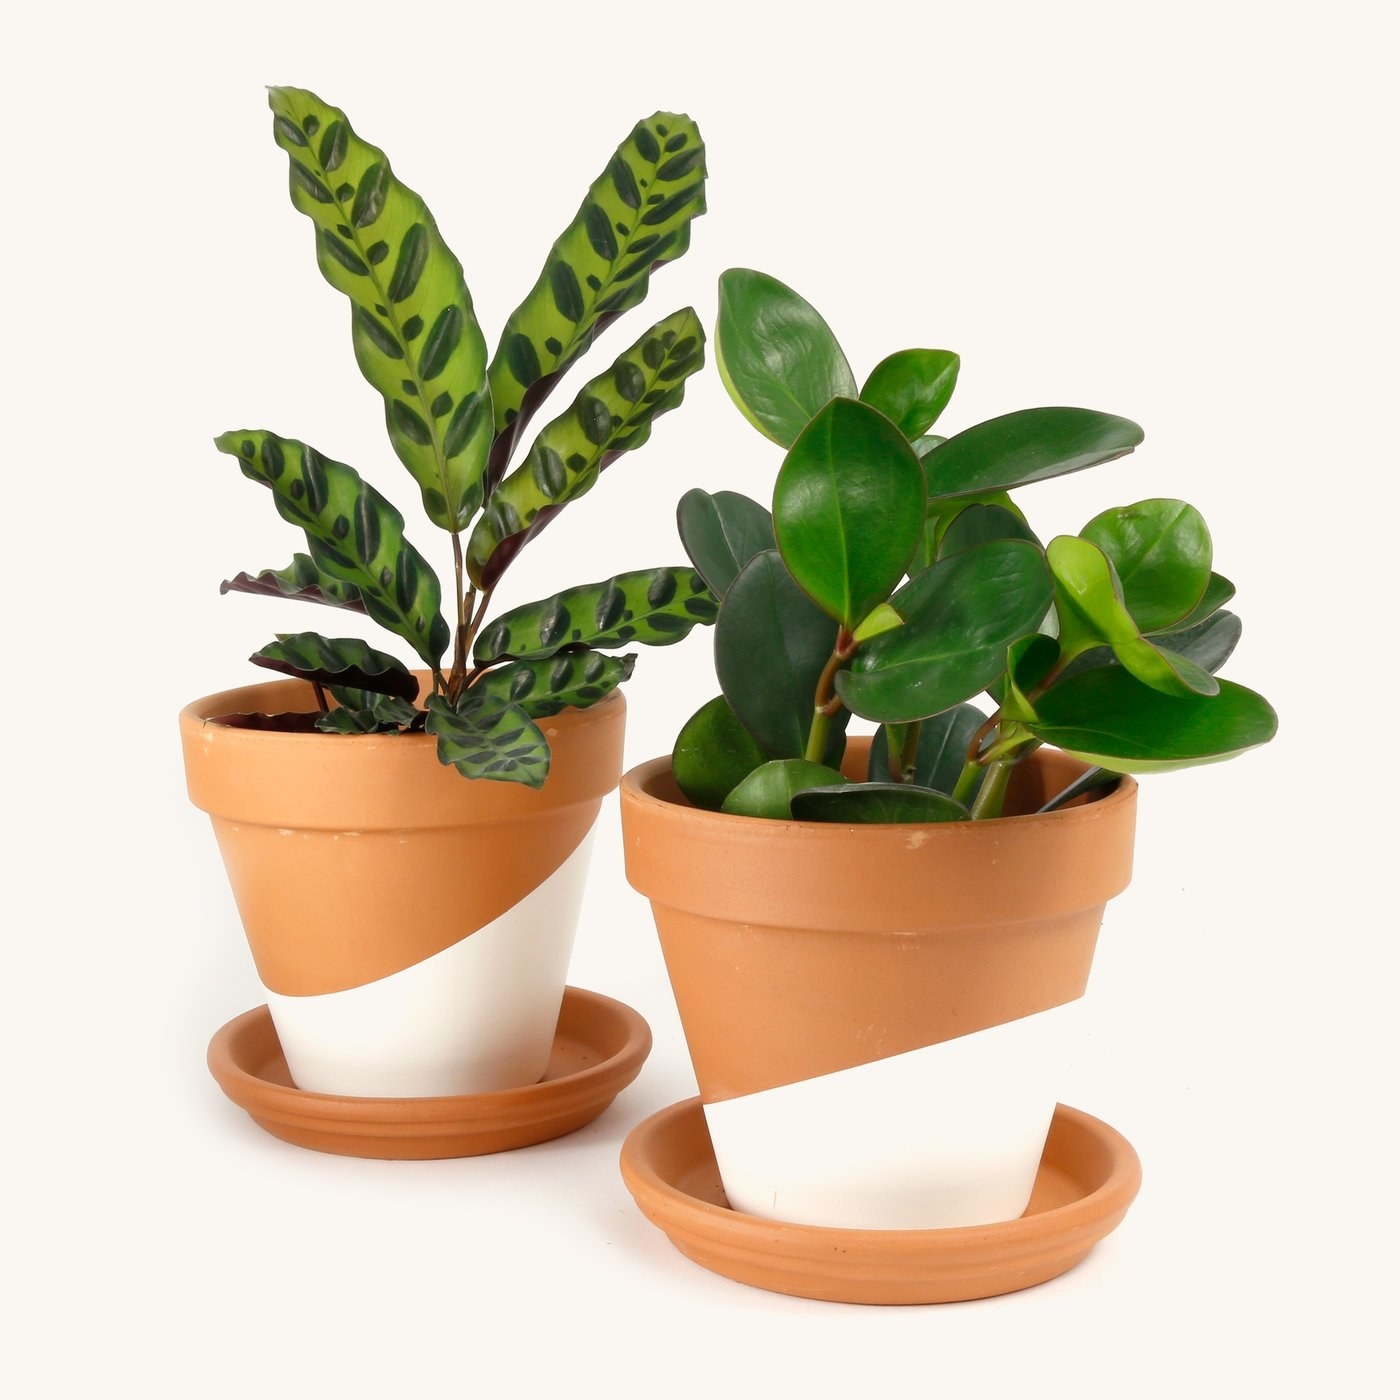 A calathea rattlesnake and peperomia obtusifolia in hand-painted terracotta pots with saucers